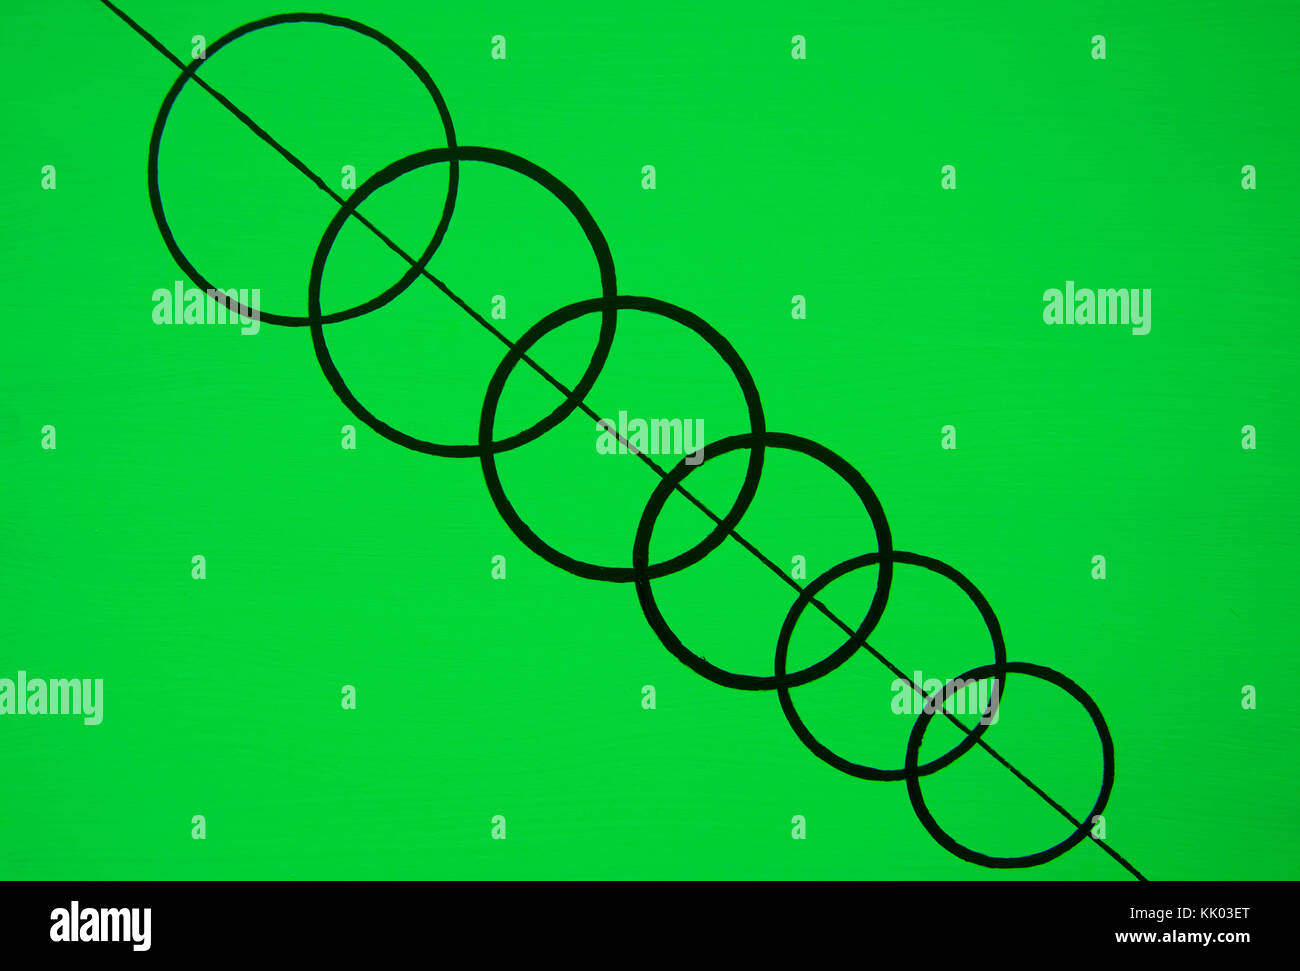 Interlinked black circles on black line with green background Stock Photo